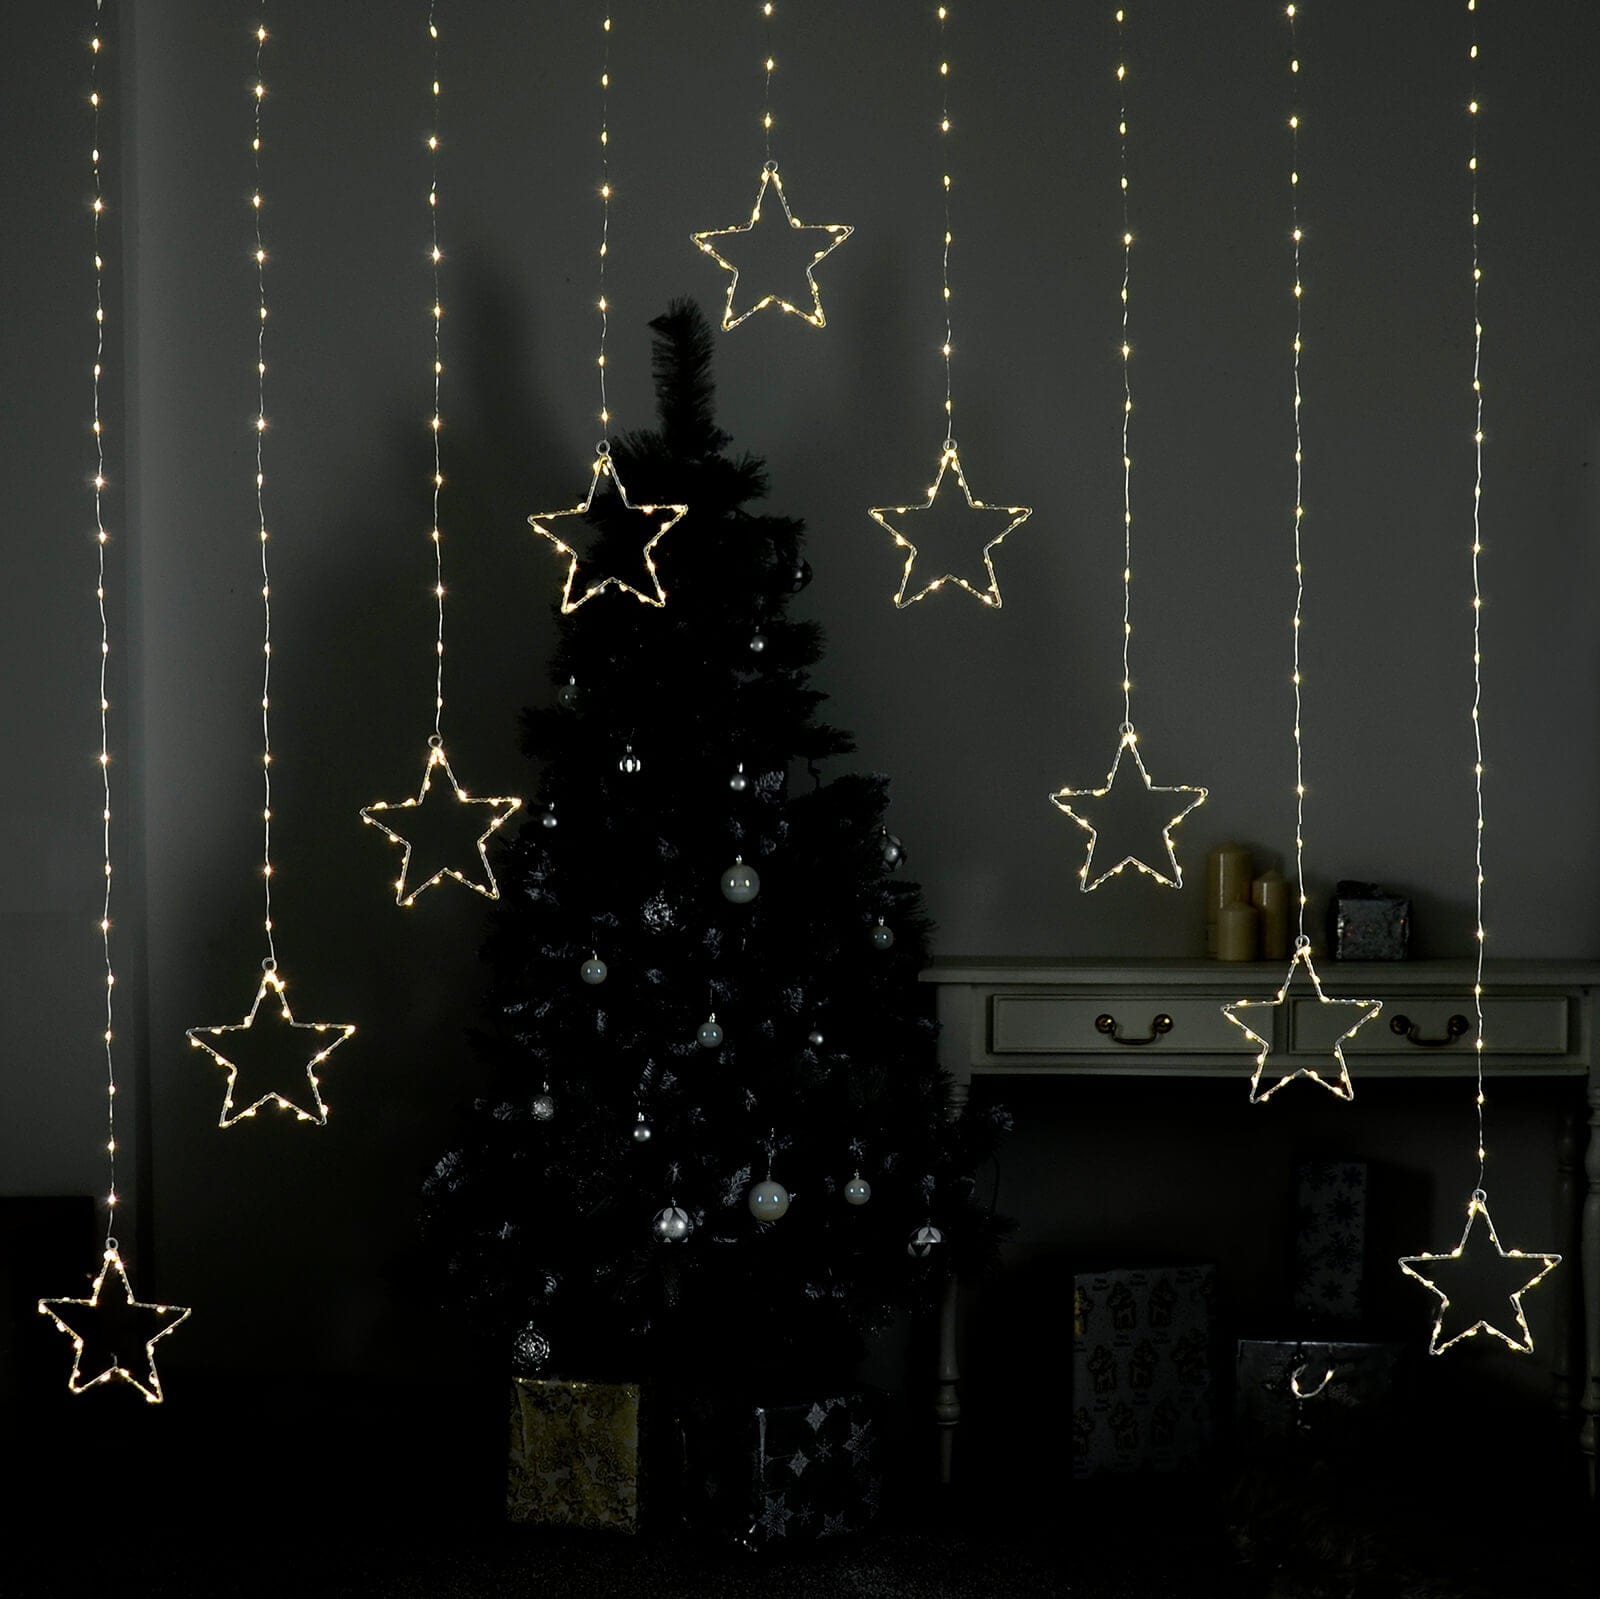 Star curtain lights with warm white LED lights in 9 strings, with Christmas tree and presents